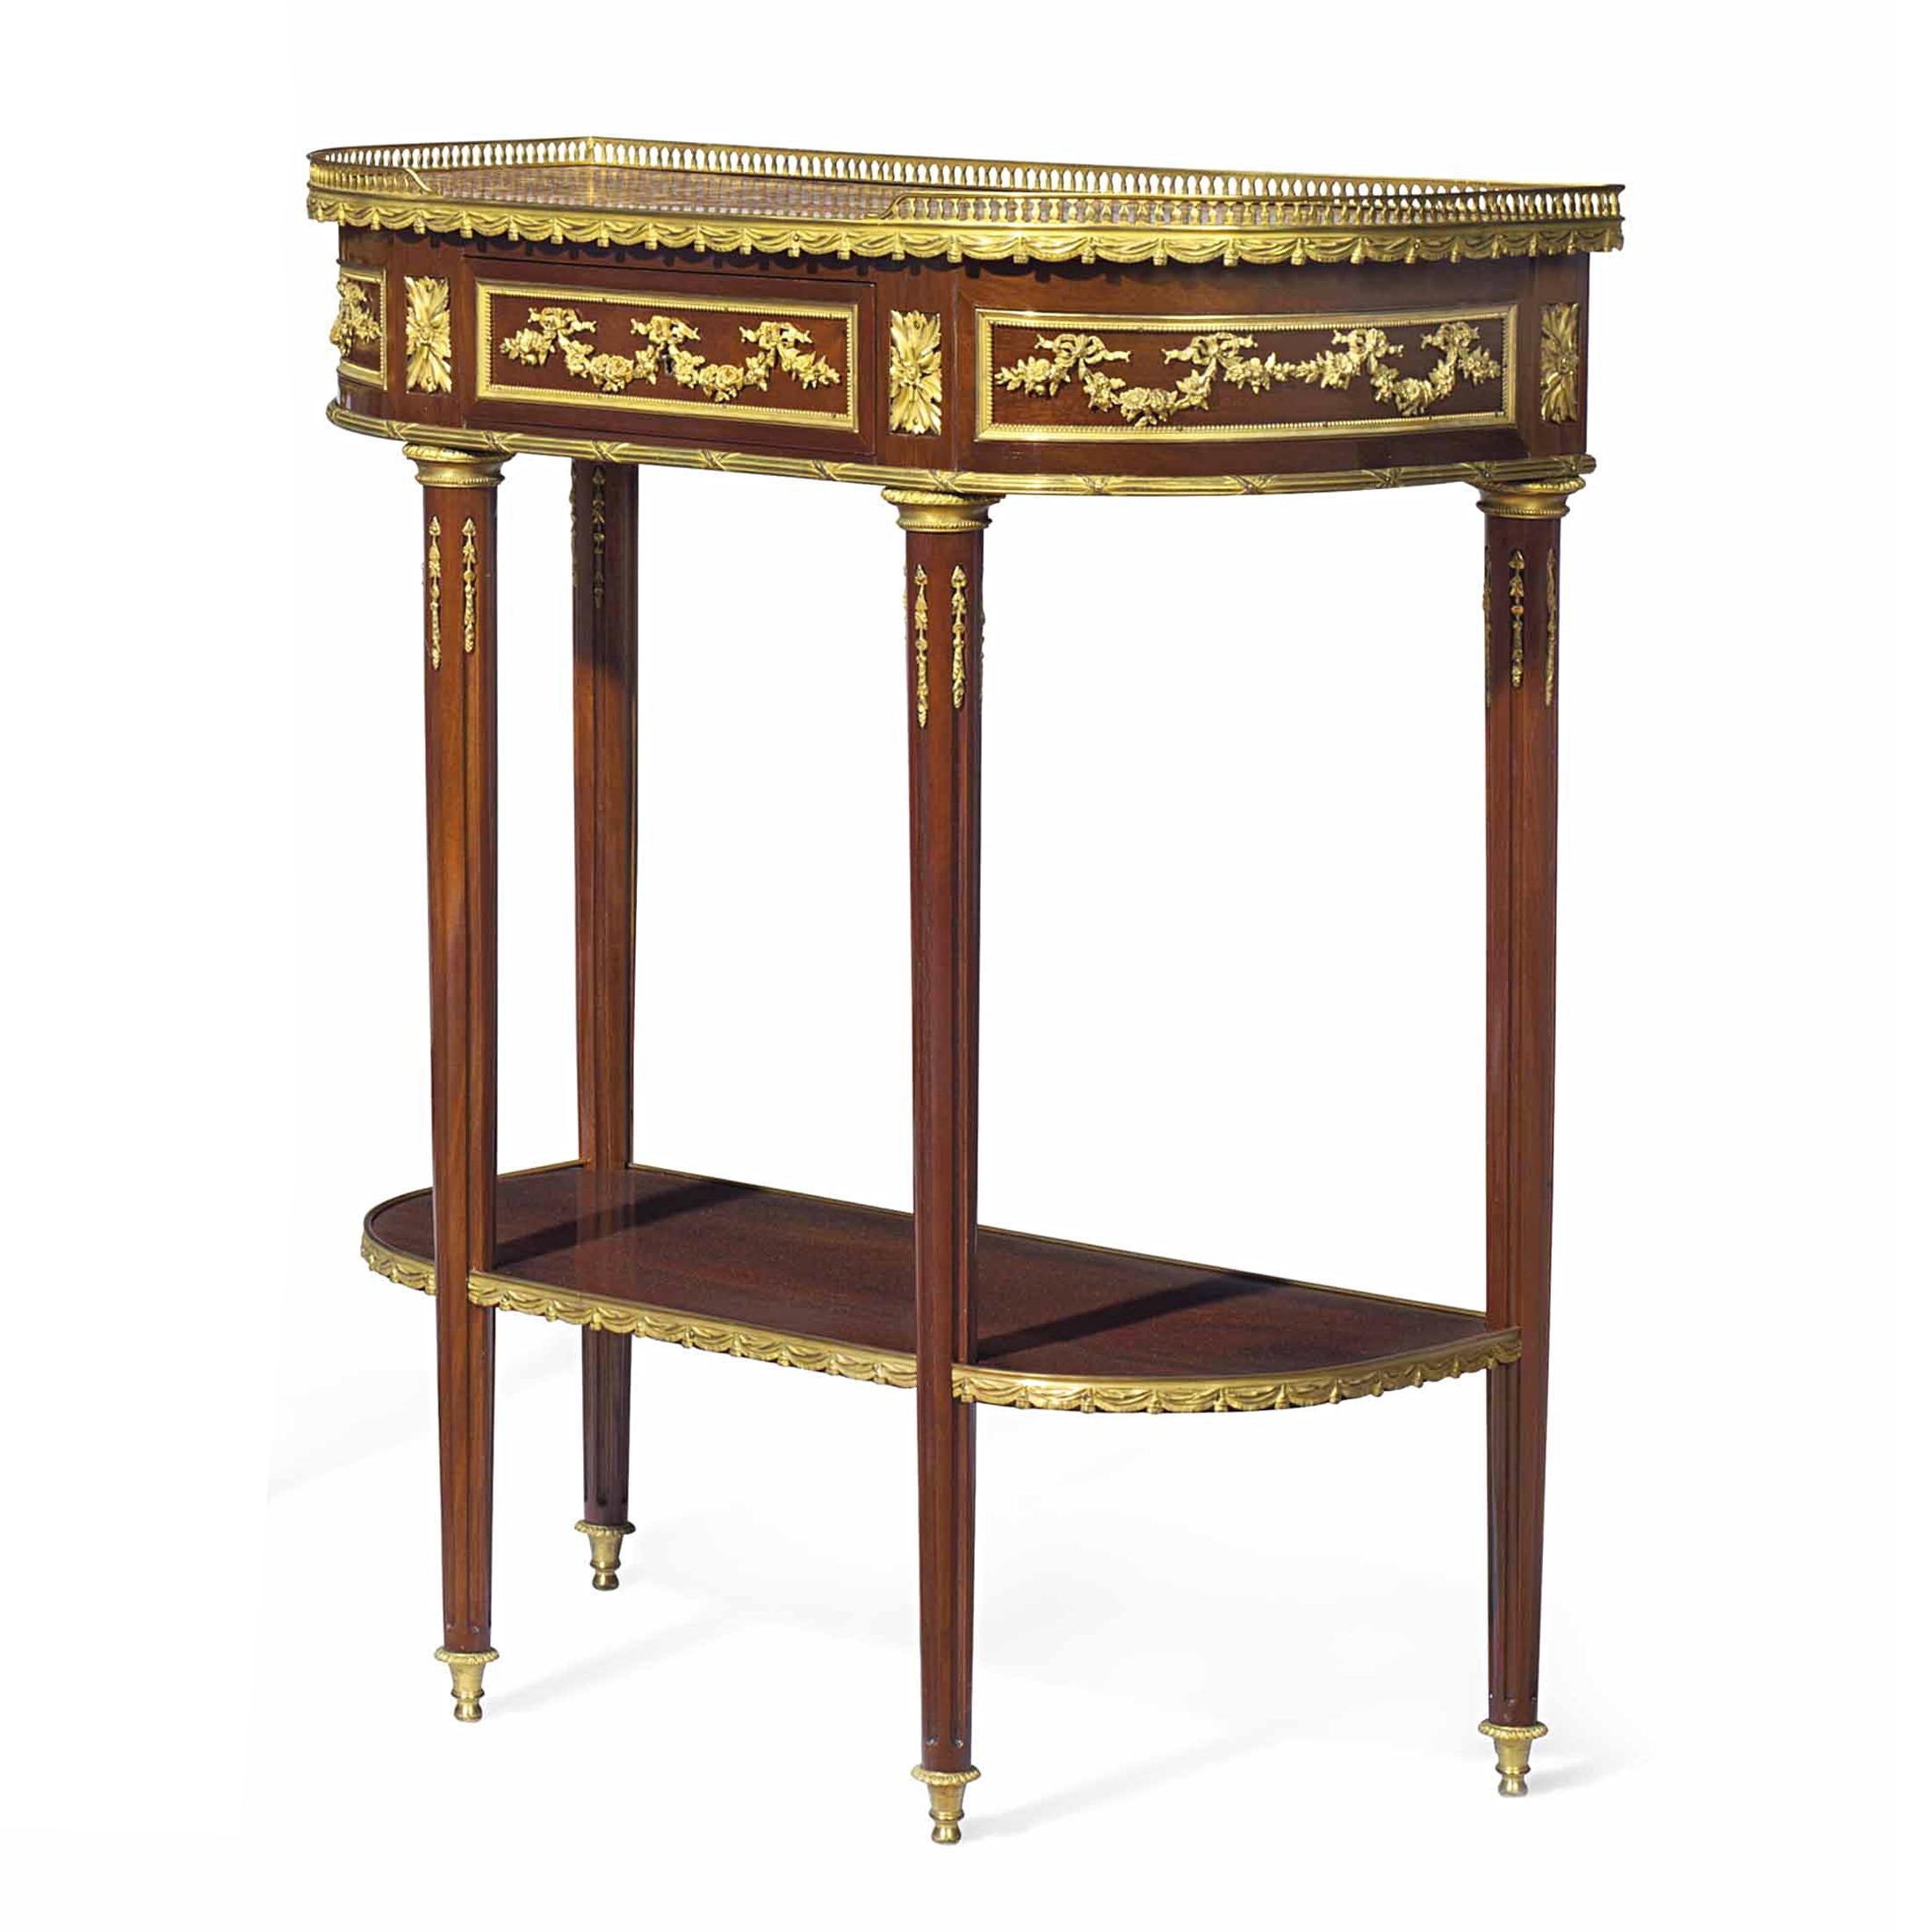 The galleried inset marble tops above swag mounts and a central festooned frieze drawer above tapering fluted legs and a medial shelf.

Date: Late 19th century
Origin: French
Dimension: 36 x 30 1/2 x 15 in.